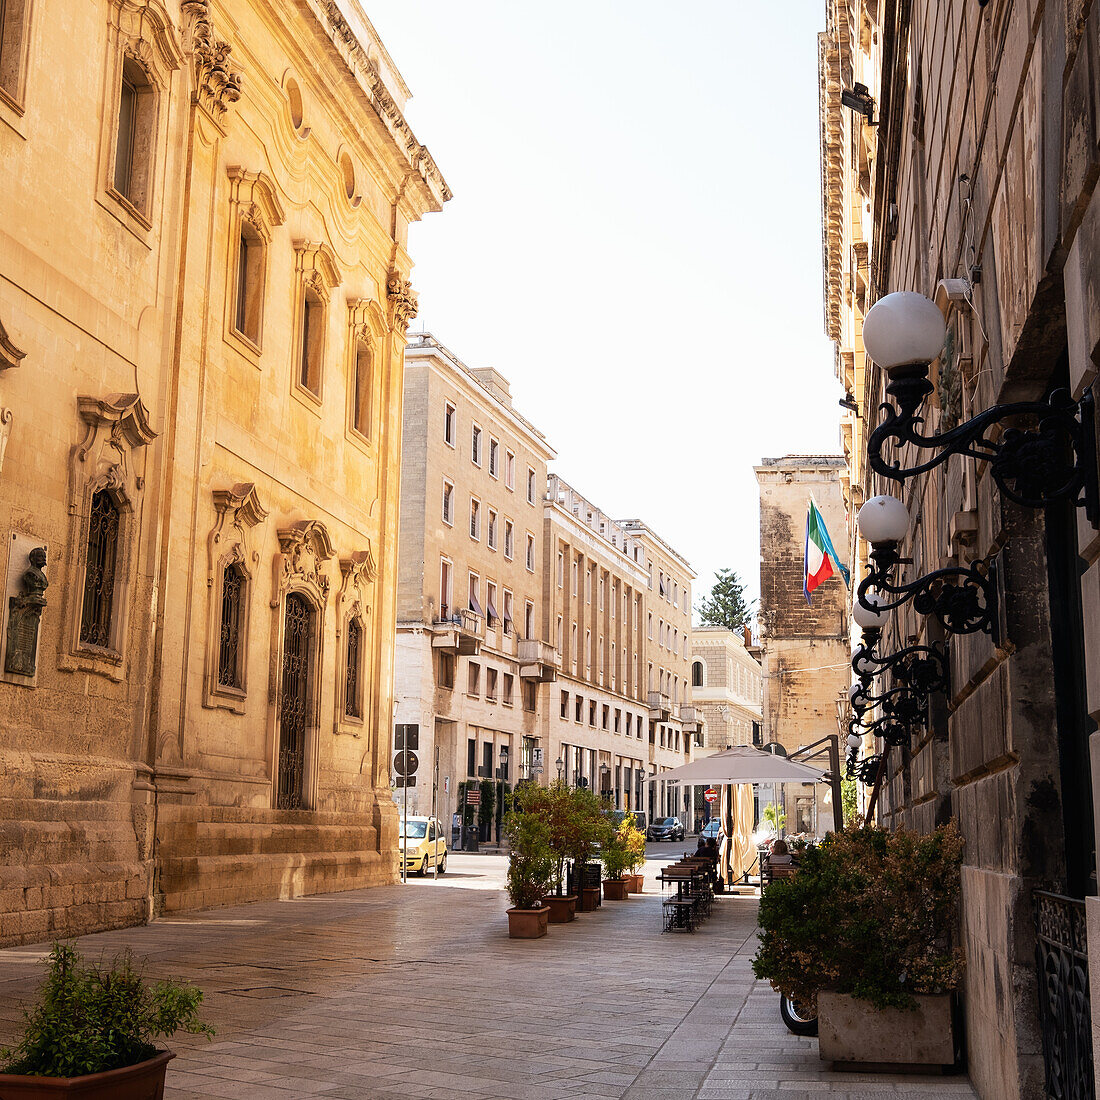 Italy, Apulia, Lecce, Town square in old town